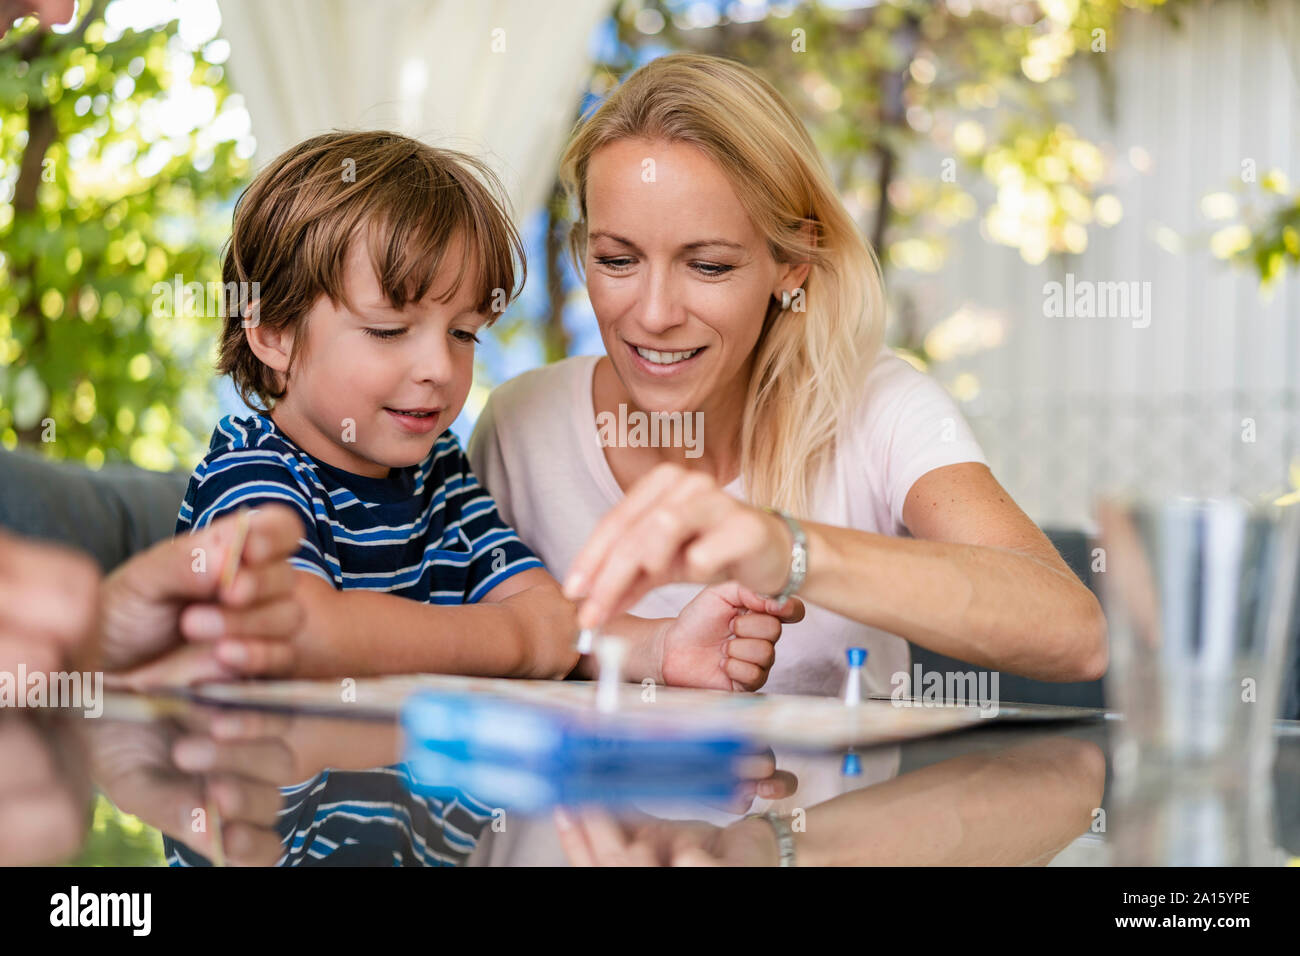 Mother and son playing a board game on terrace Stock Photo